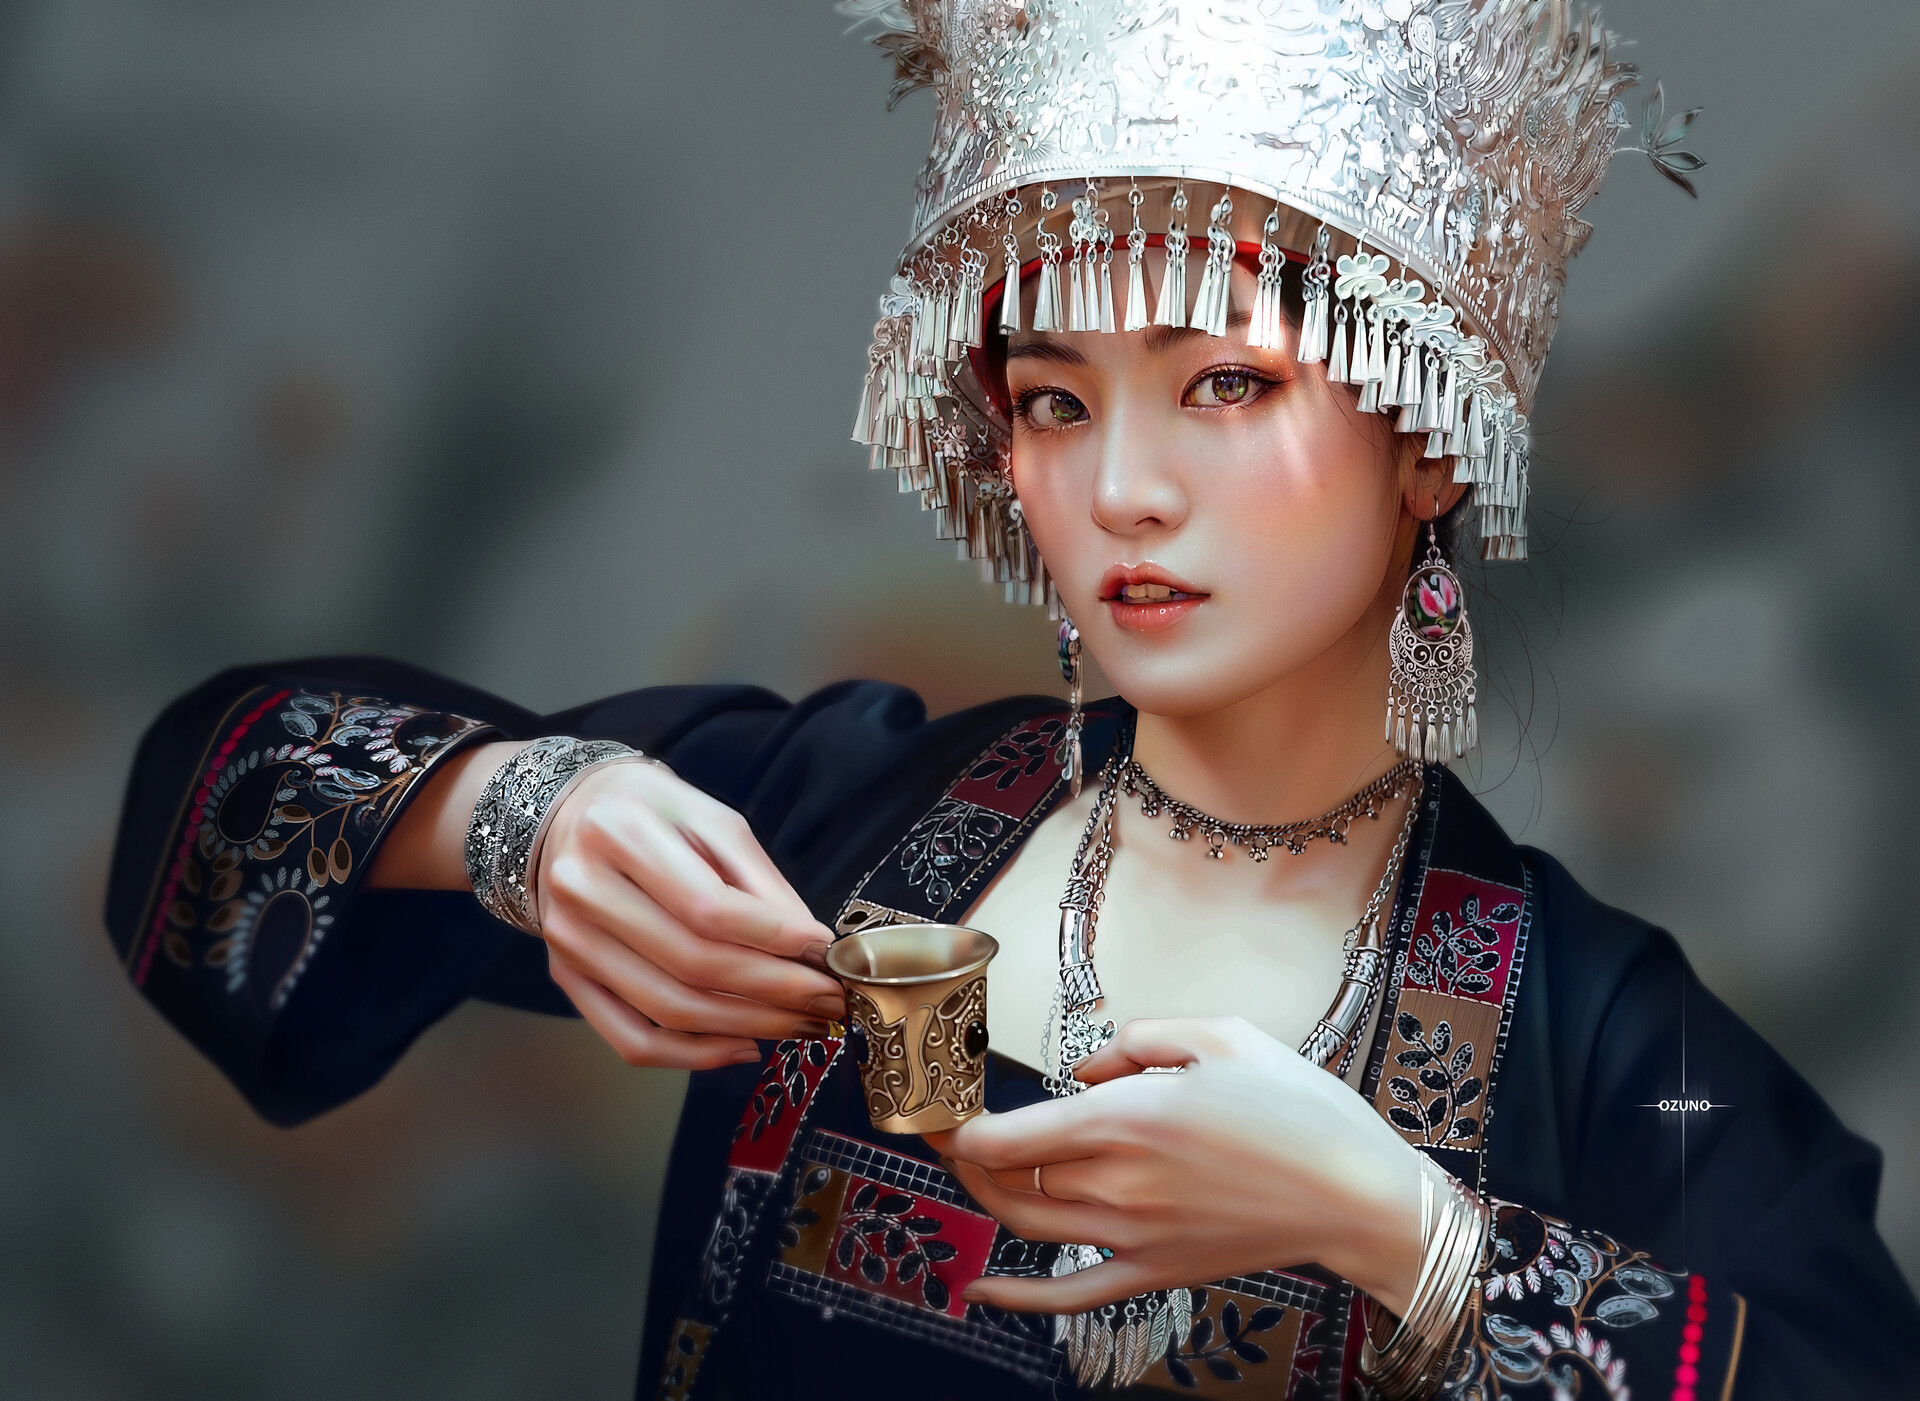 Huy Ozuno Looking At Viewer Cup Open Mouth Women Digital Art Depth Of Field Blurry Background Hands  1920x1401